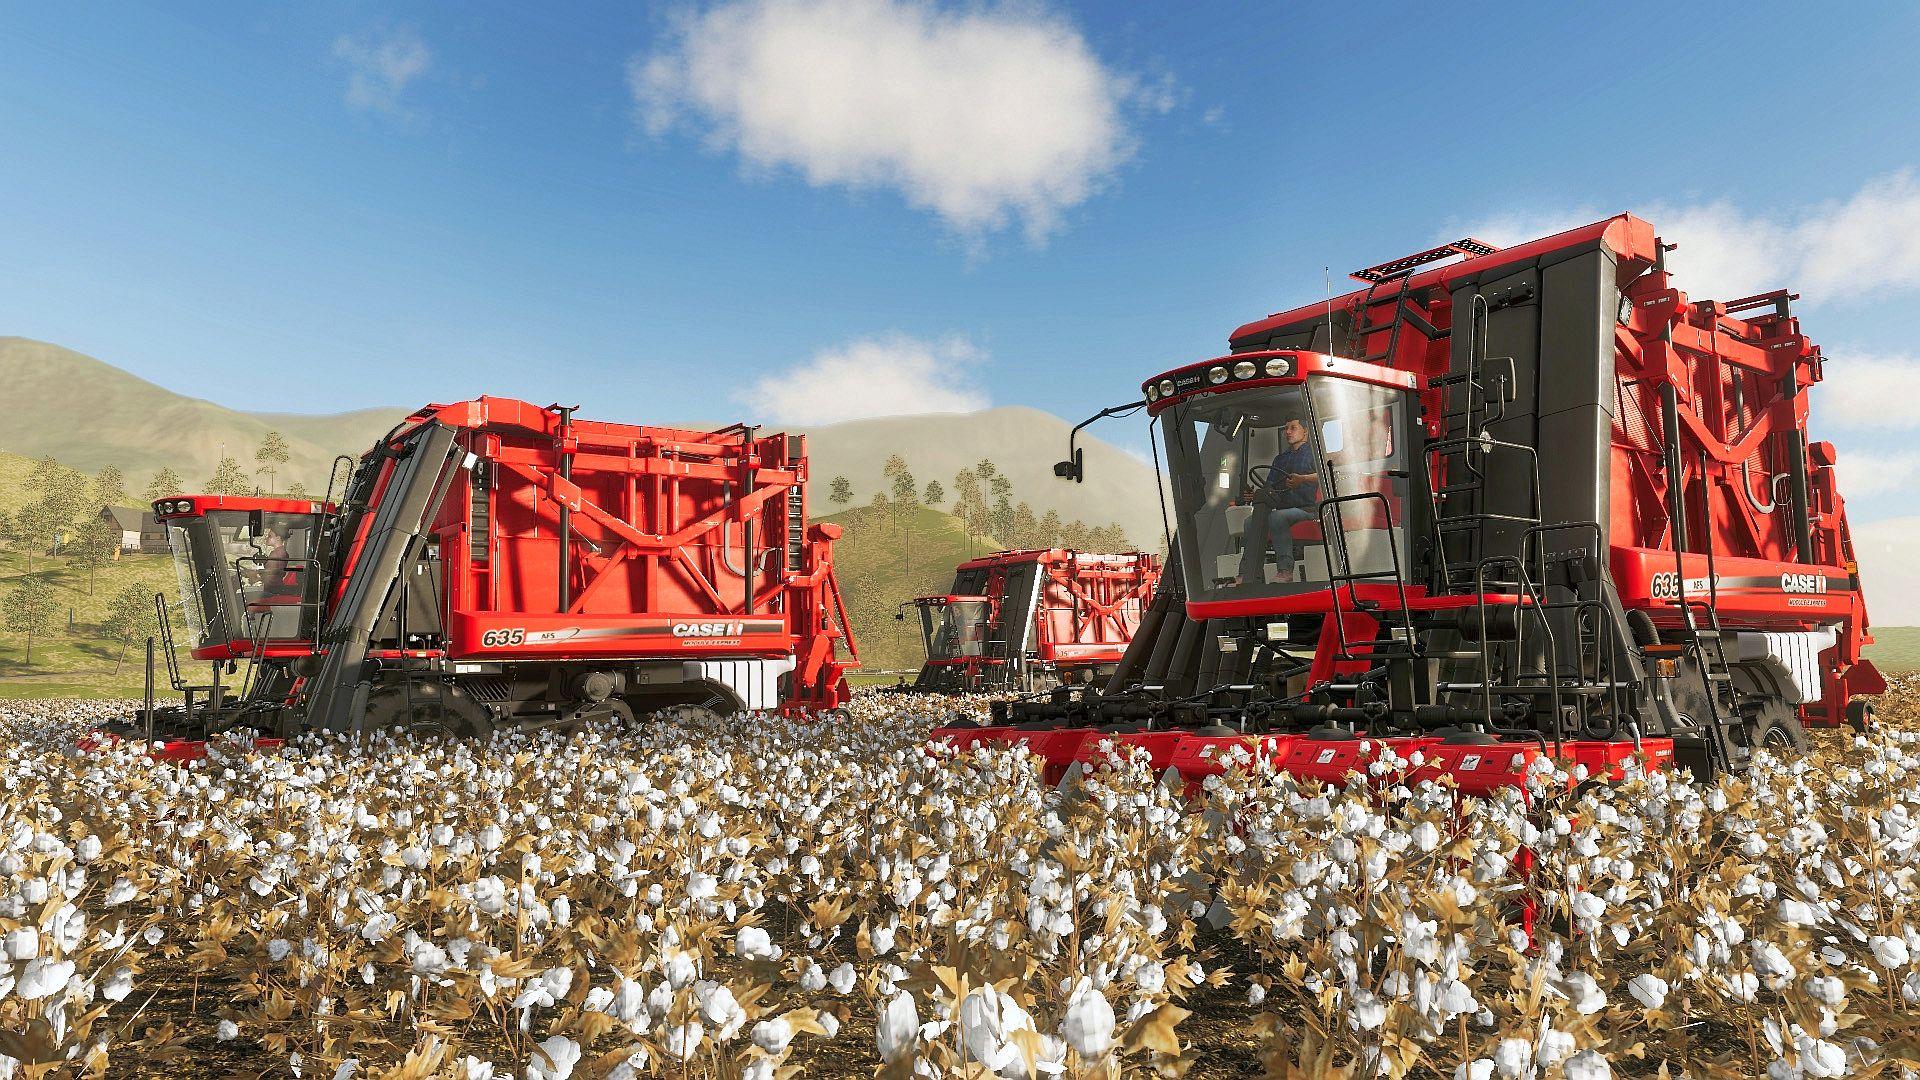 Farming Simulator 19 sells a million copies and adds landscaping